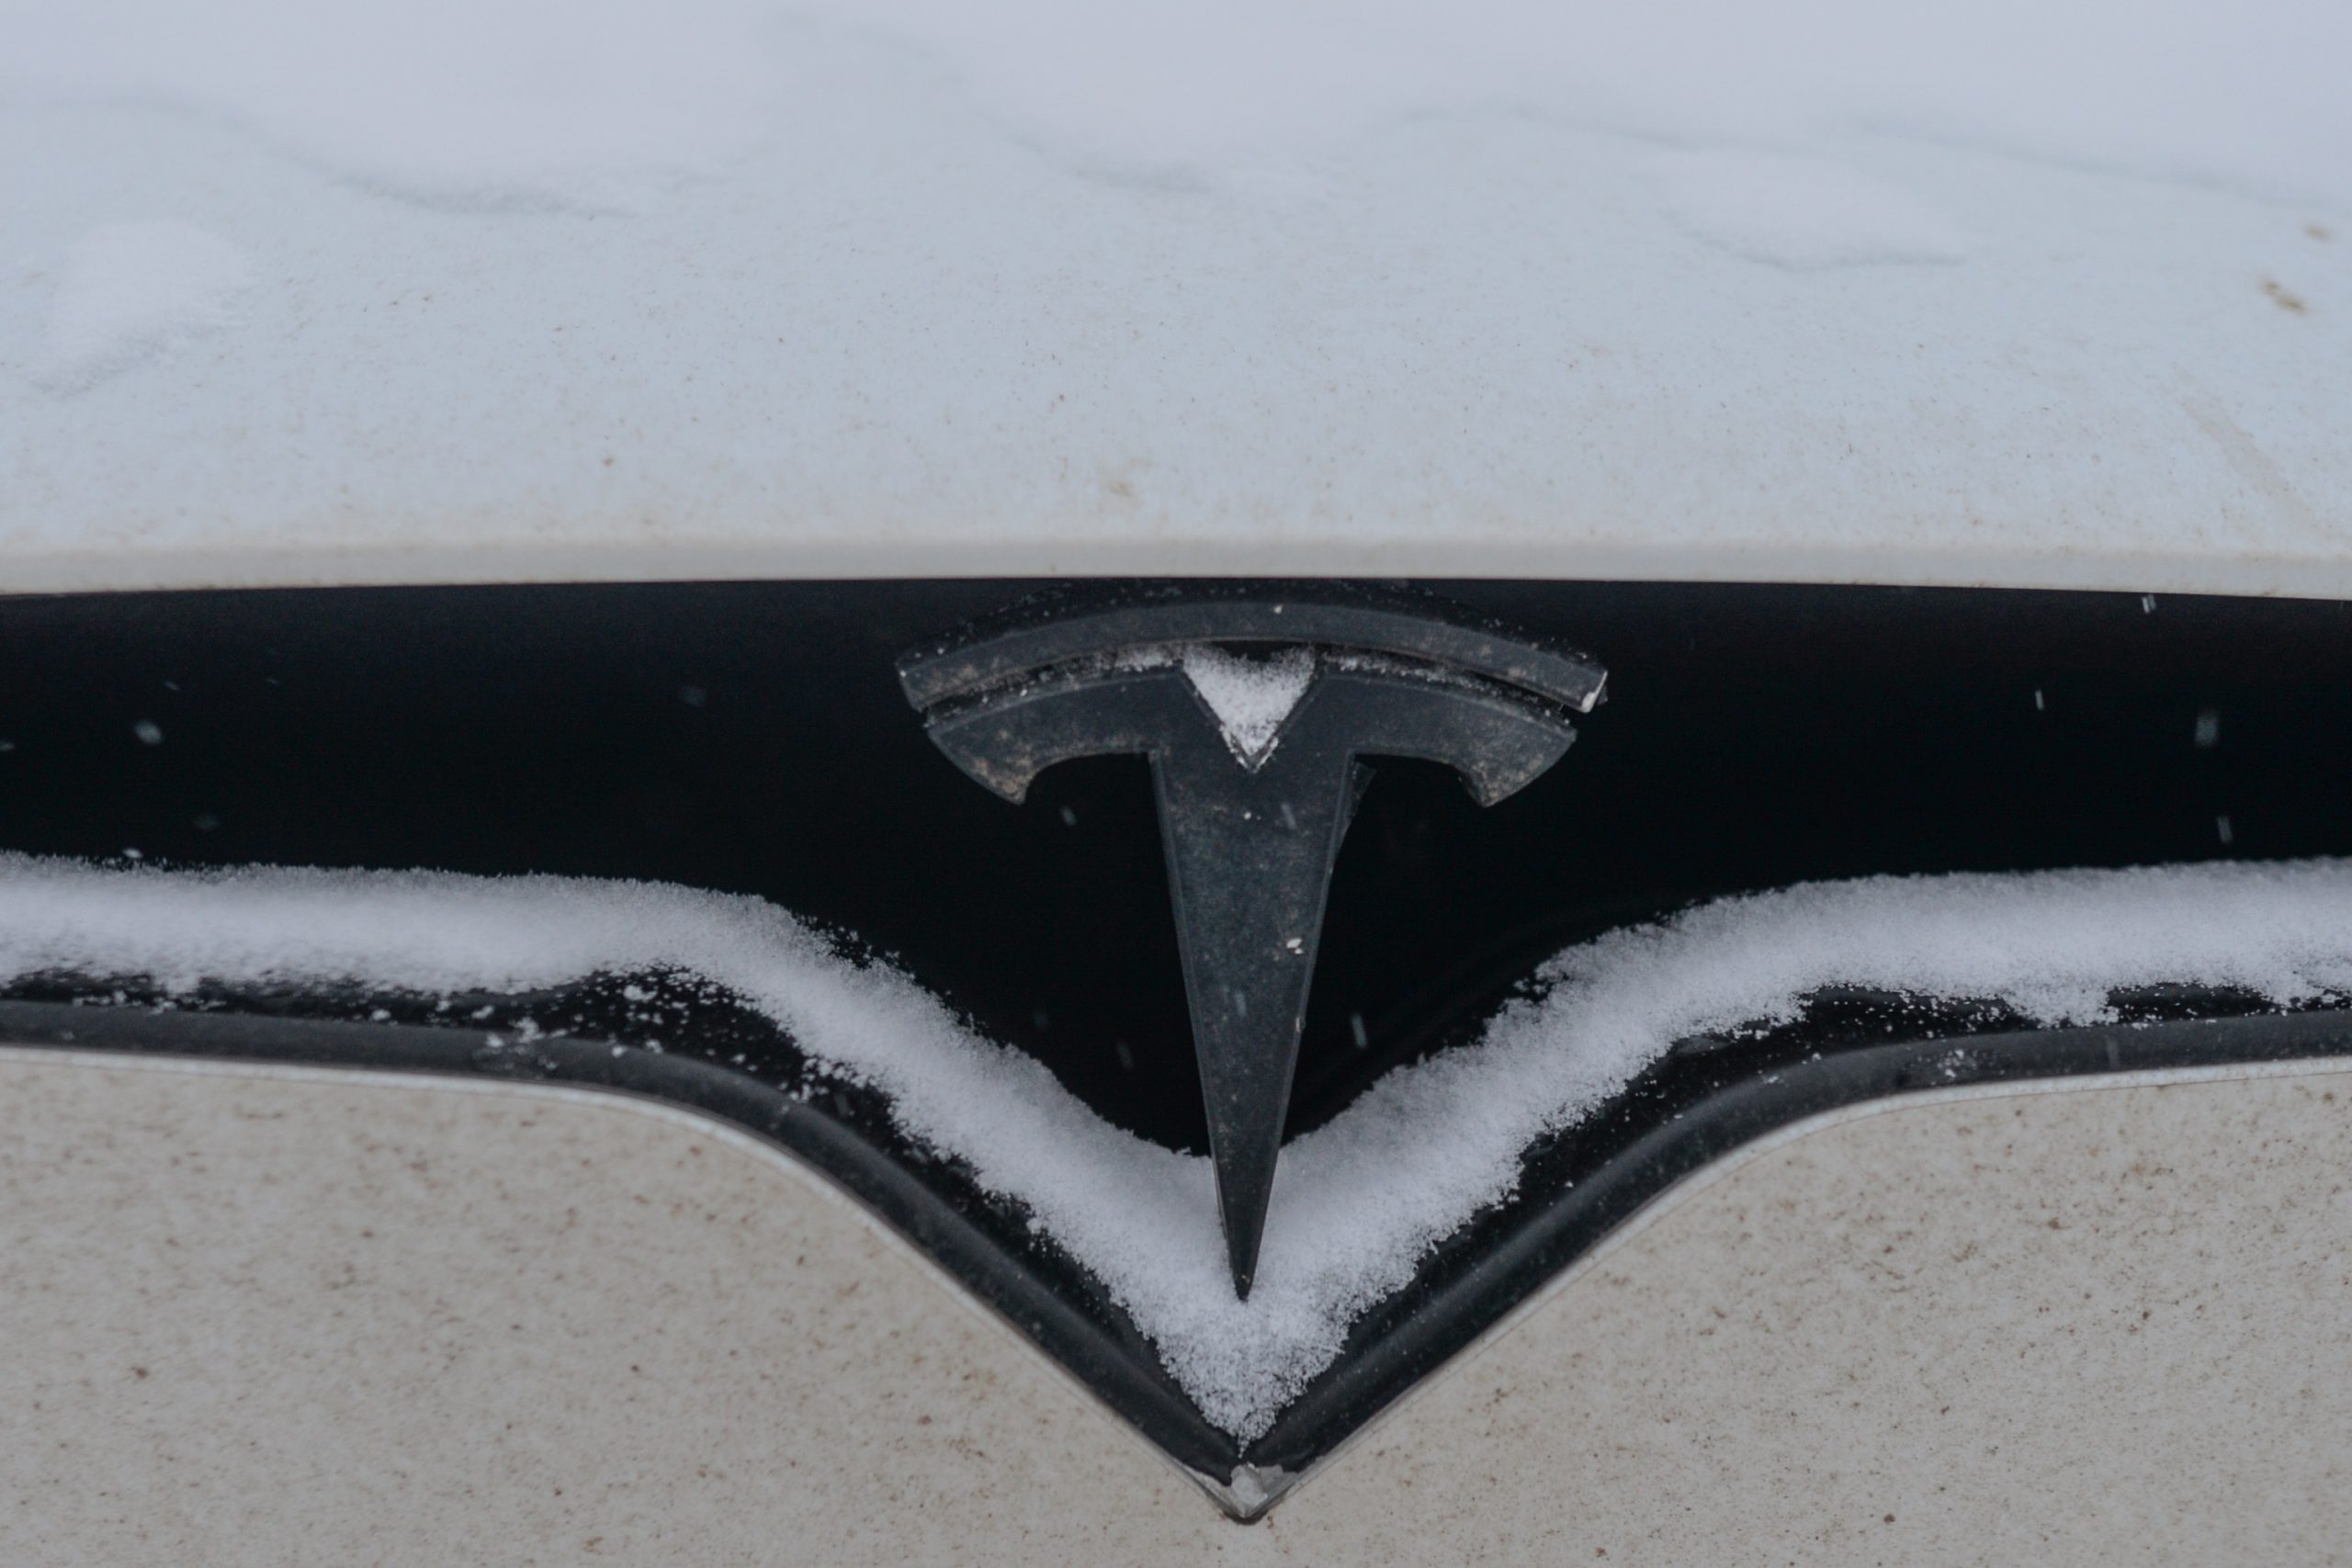 The nose of a Tesla EV covered in snow